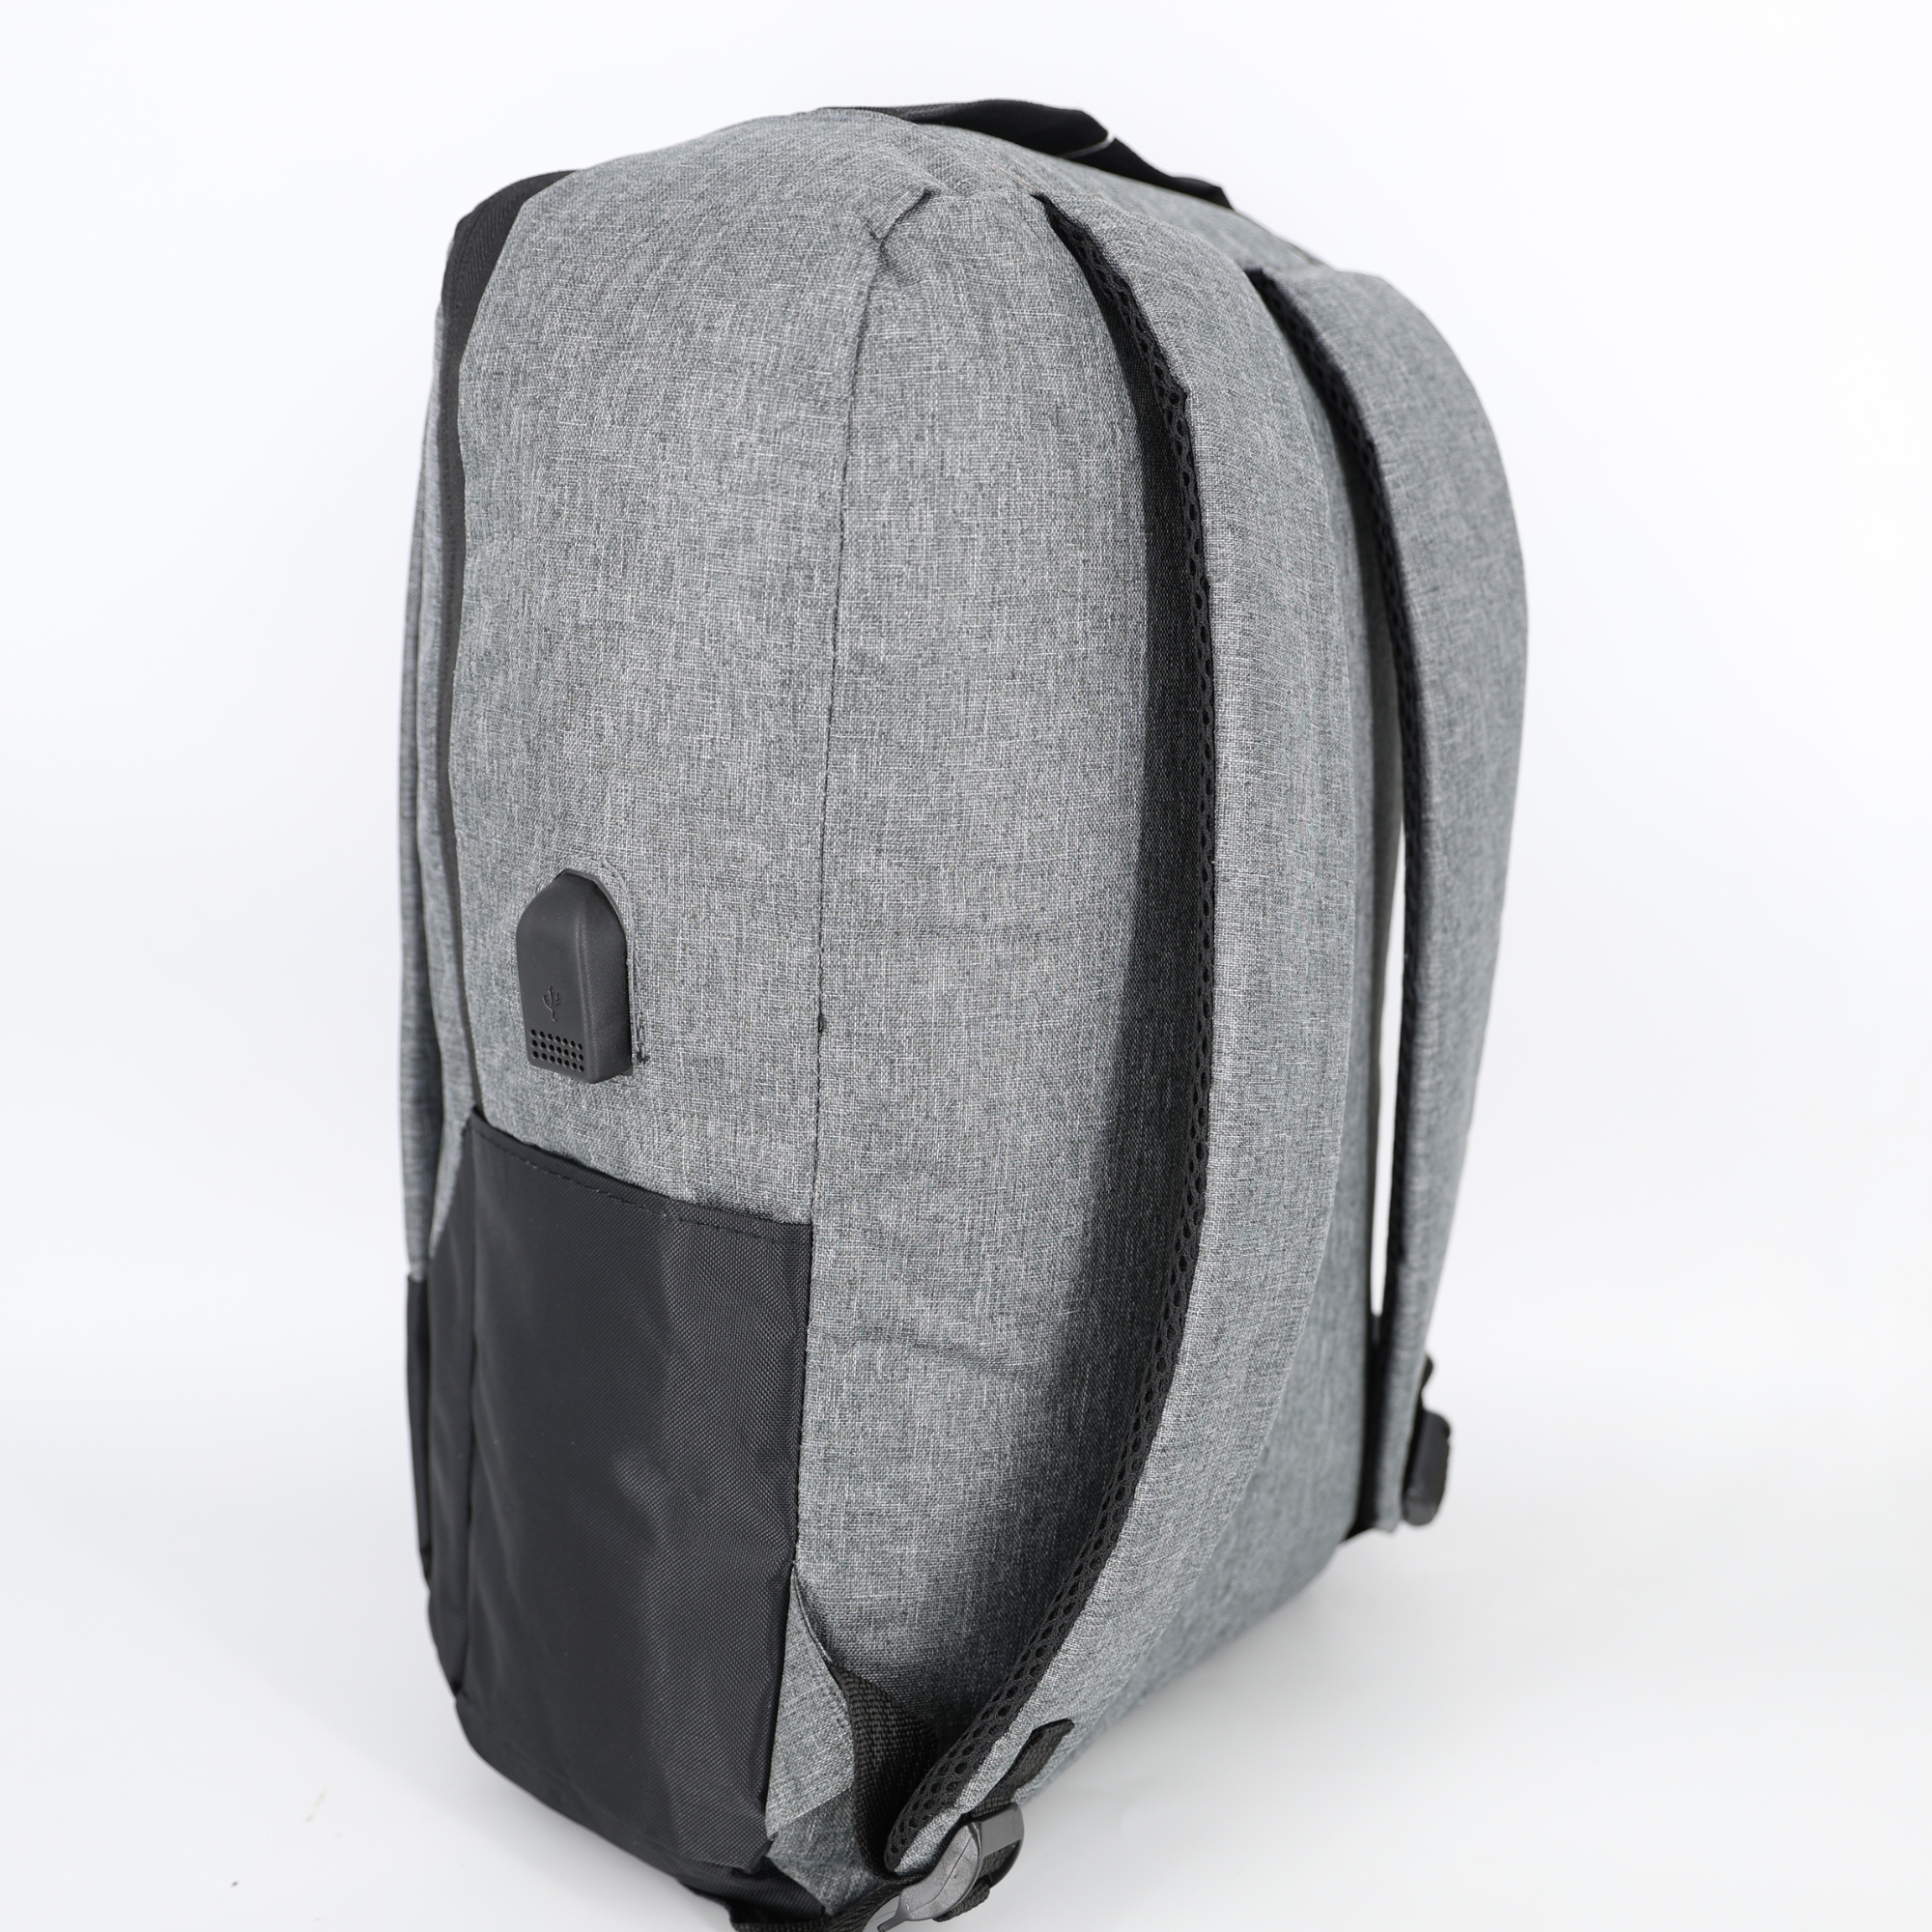 PIGEON Laptop Backpack for Business with USB port and Powerbank cable